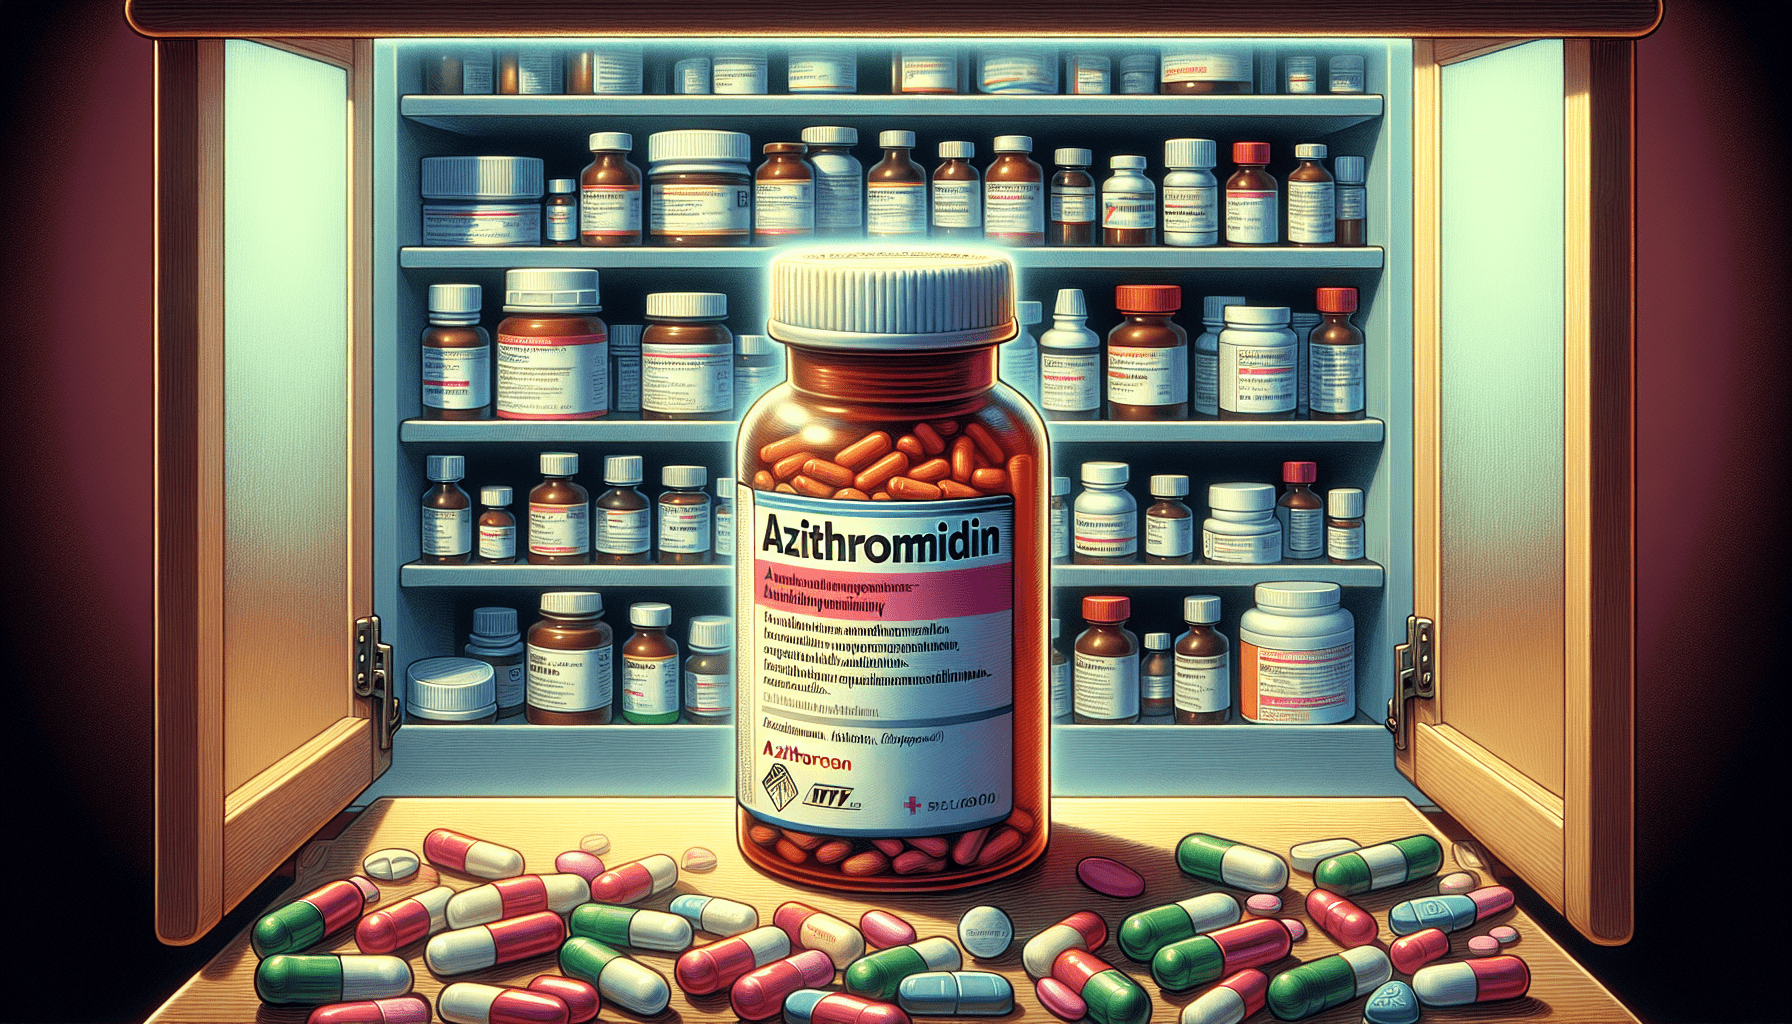 What Happens If You Take Azithromycin When You Don’t Need It?